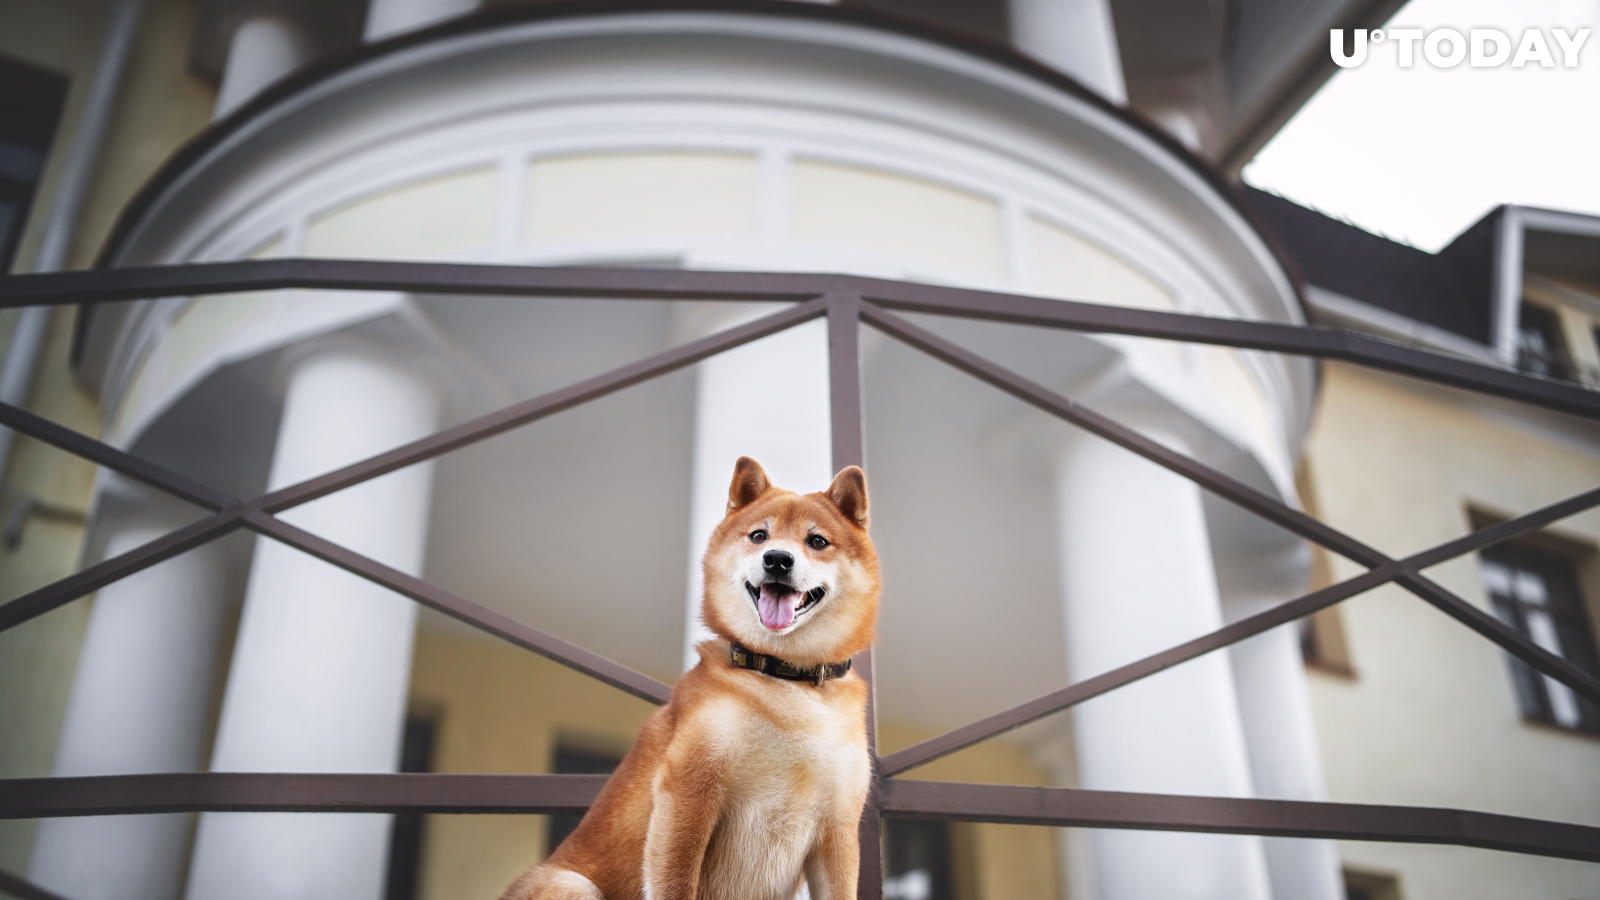 Shiba Inu Games Is "Just the Beginning" of PlaySide Collaboration 